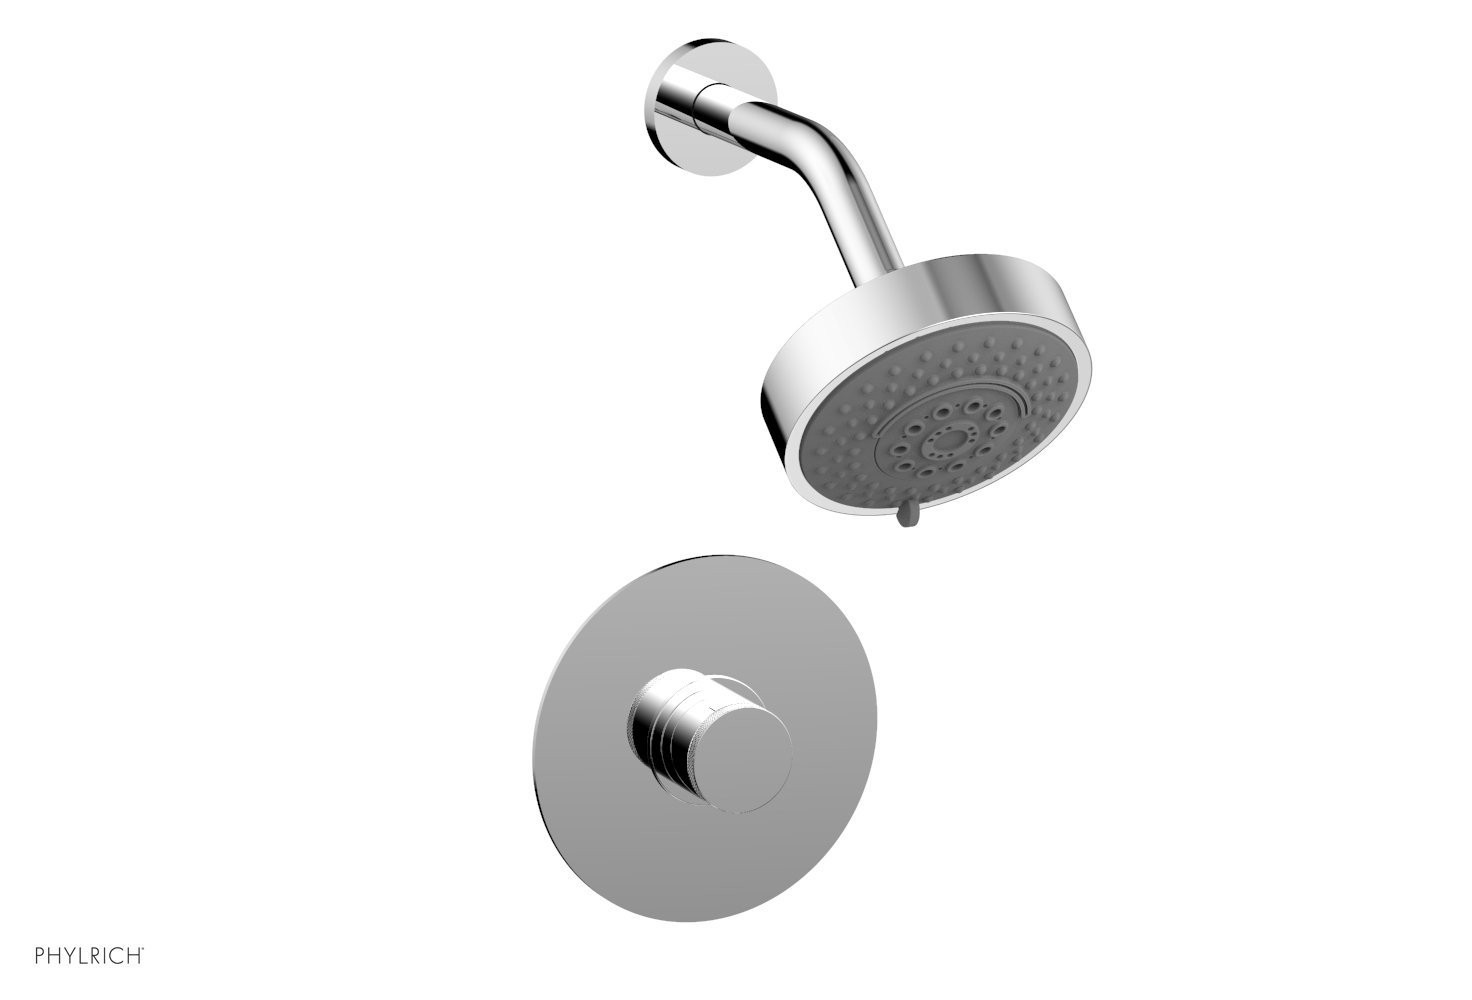 PHYLRICH 230-21/026 BASIC II WALL MOUNT PRESSURE BALANCE SHOWER SET WITH KNURLED HANDLE